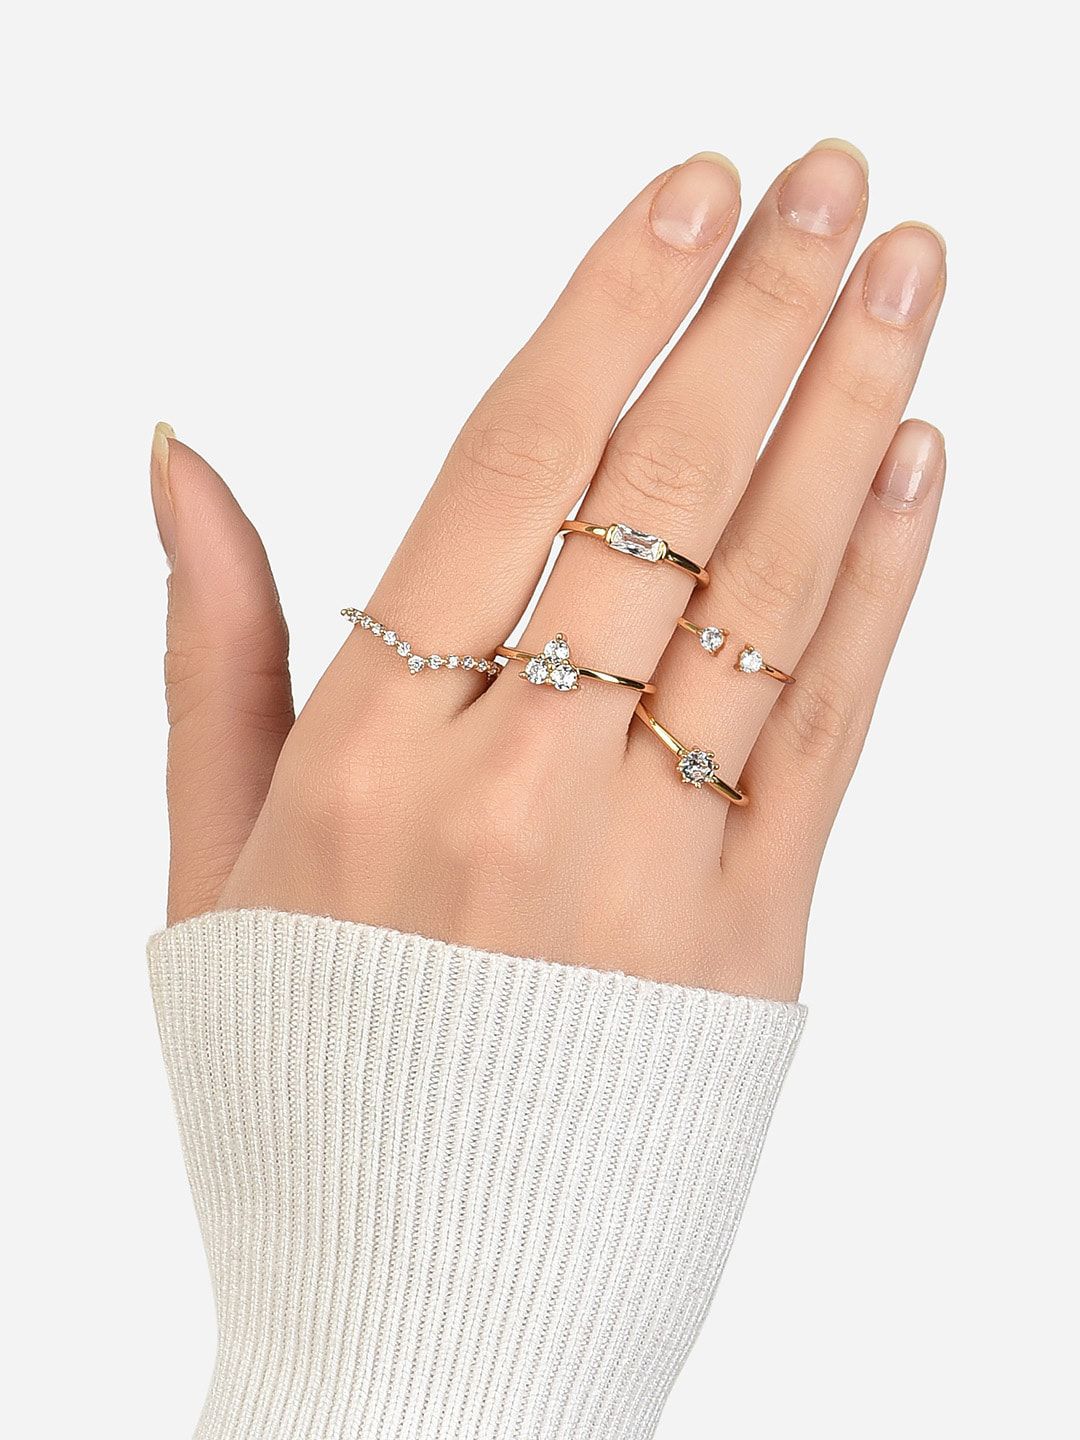 Lilly & sparkle Set Of 5 White Gold-Plated CZ-Studded Finger Ring Price in India